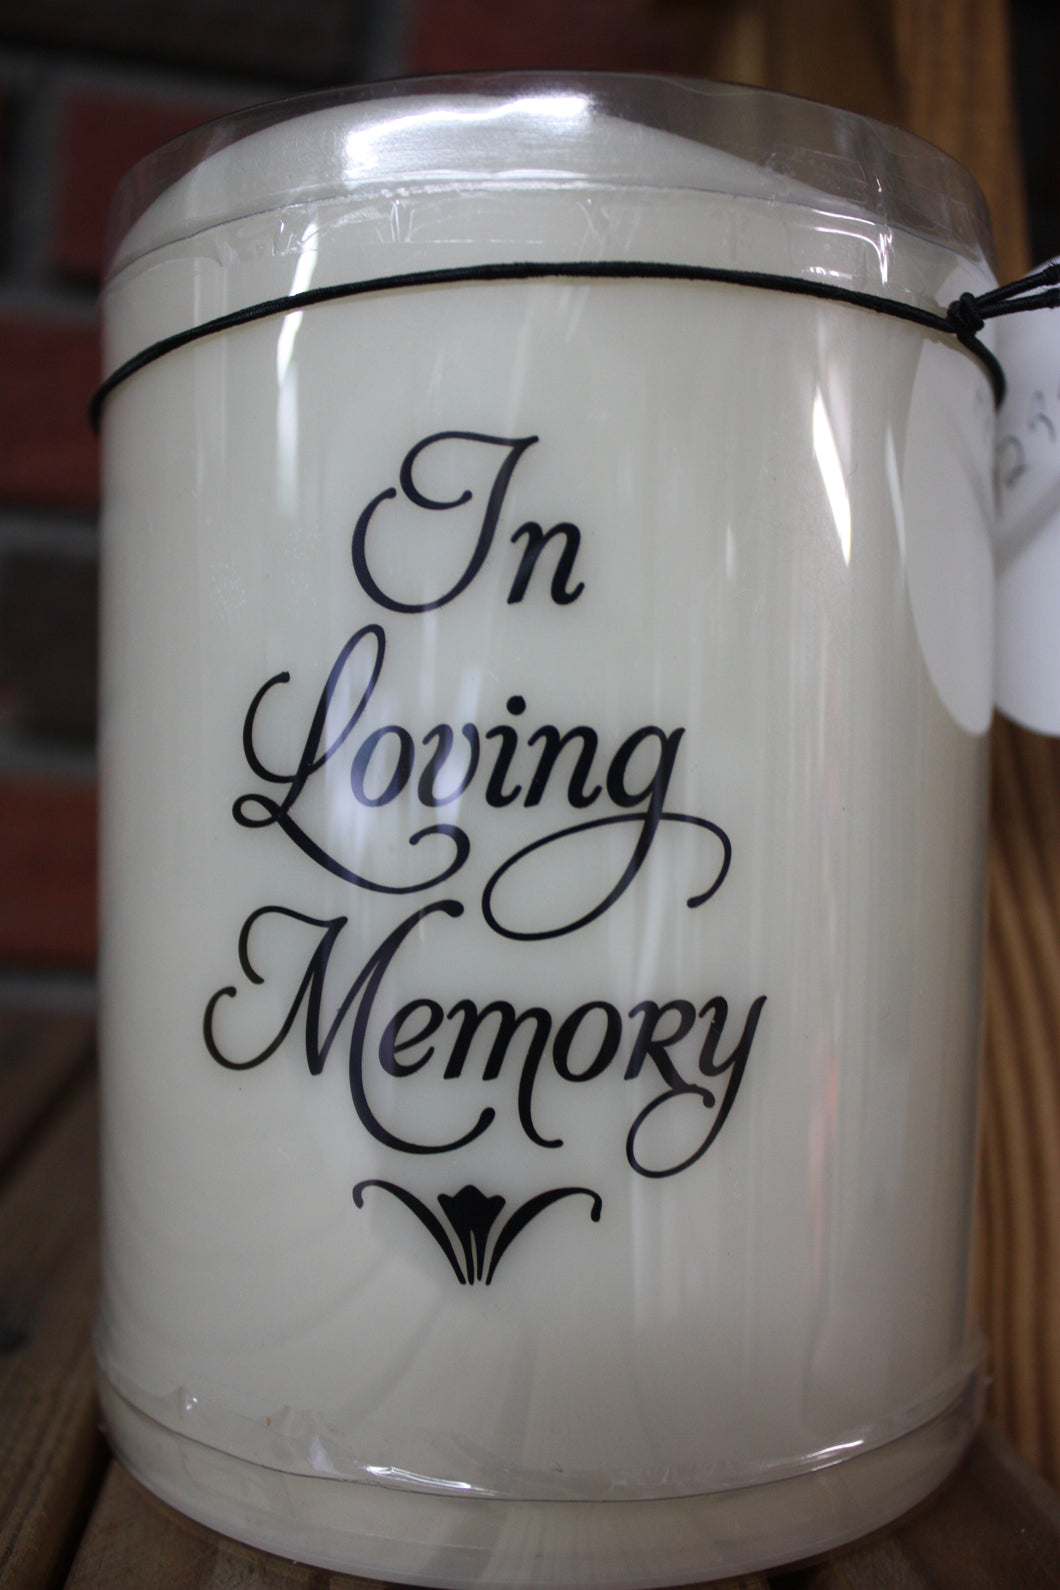 Bereavement Gifts and Quilts REMEMBERENCE CANDLE